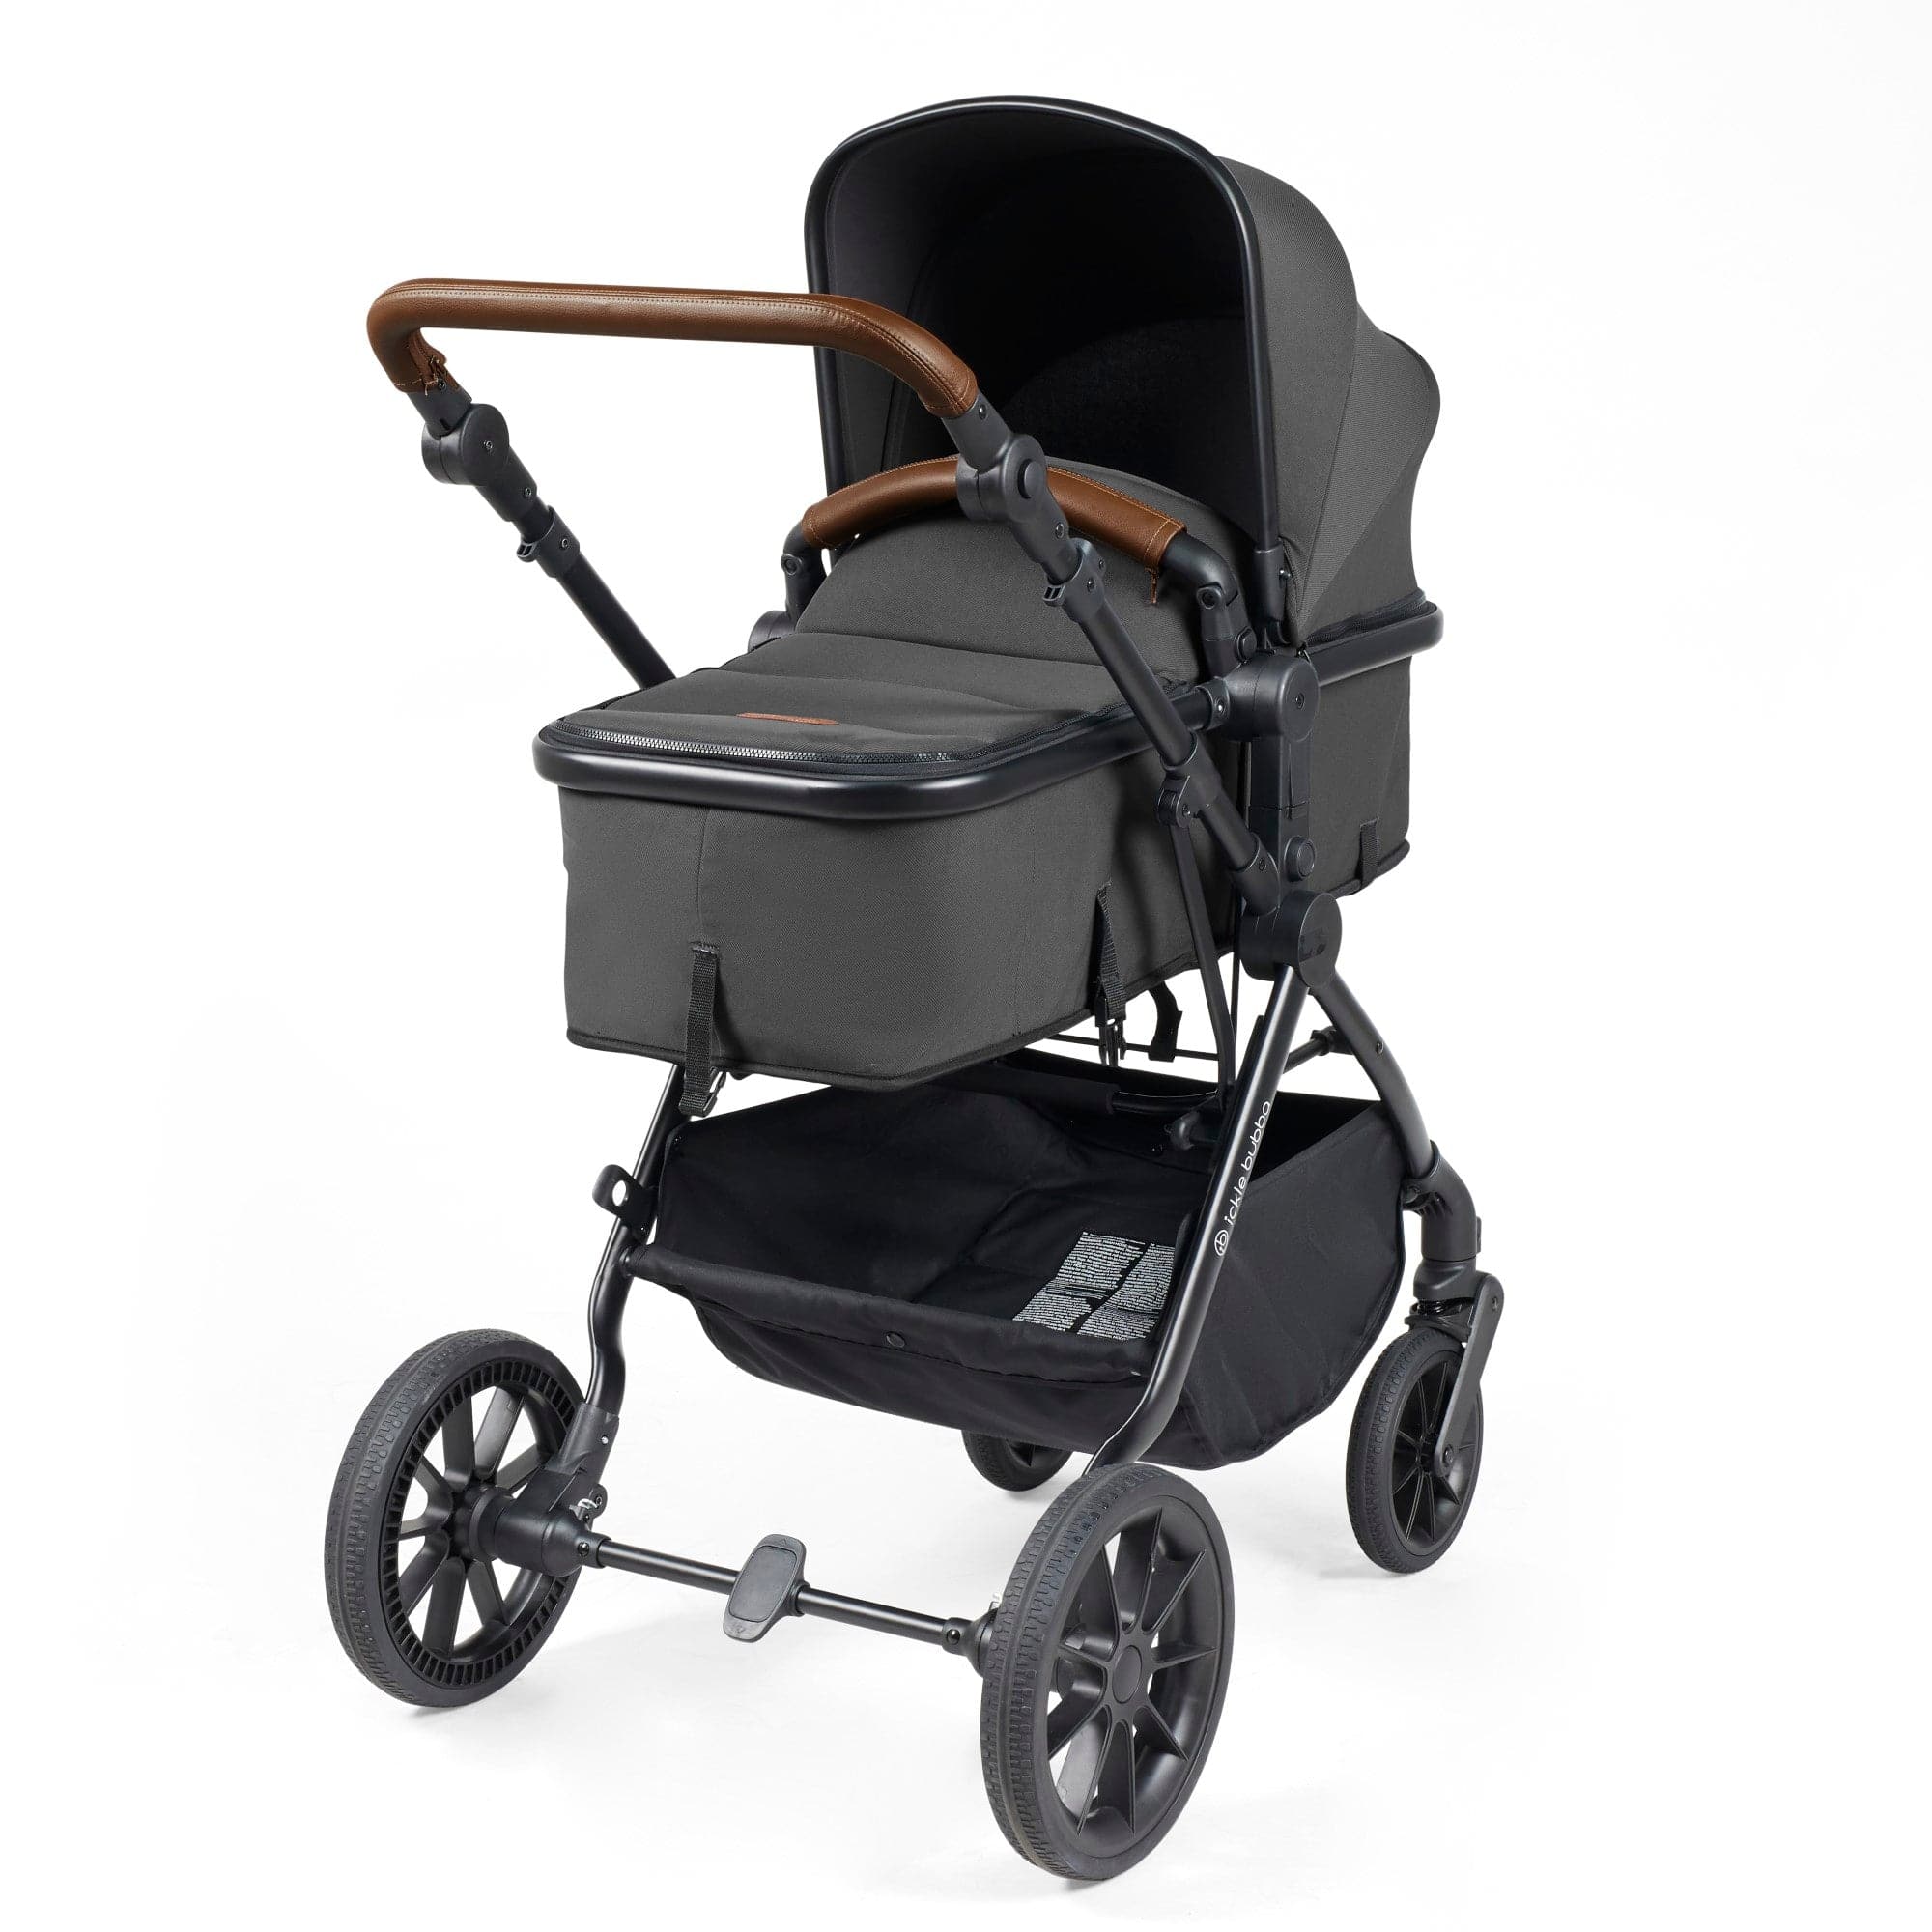 Ickle Bubba Cosmo I-Size Travel System With Stratus Car Seat & Isofix Base - Black - For Your Little One